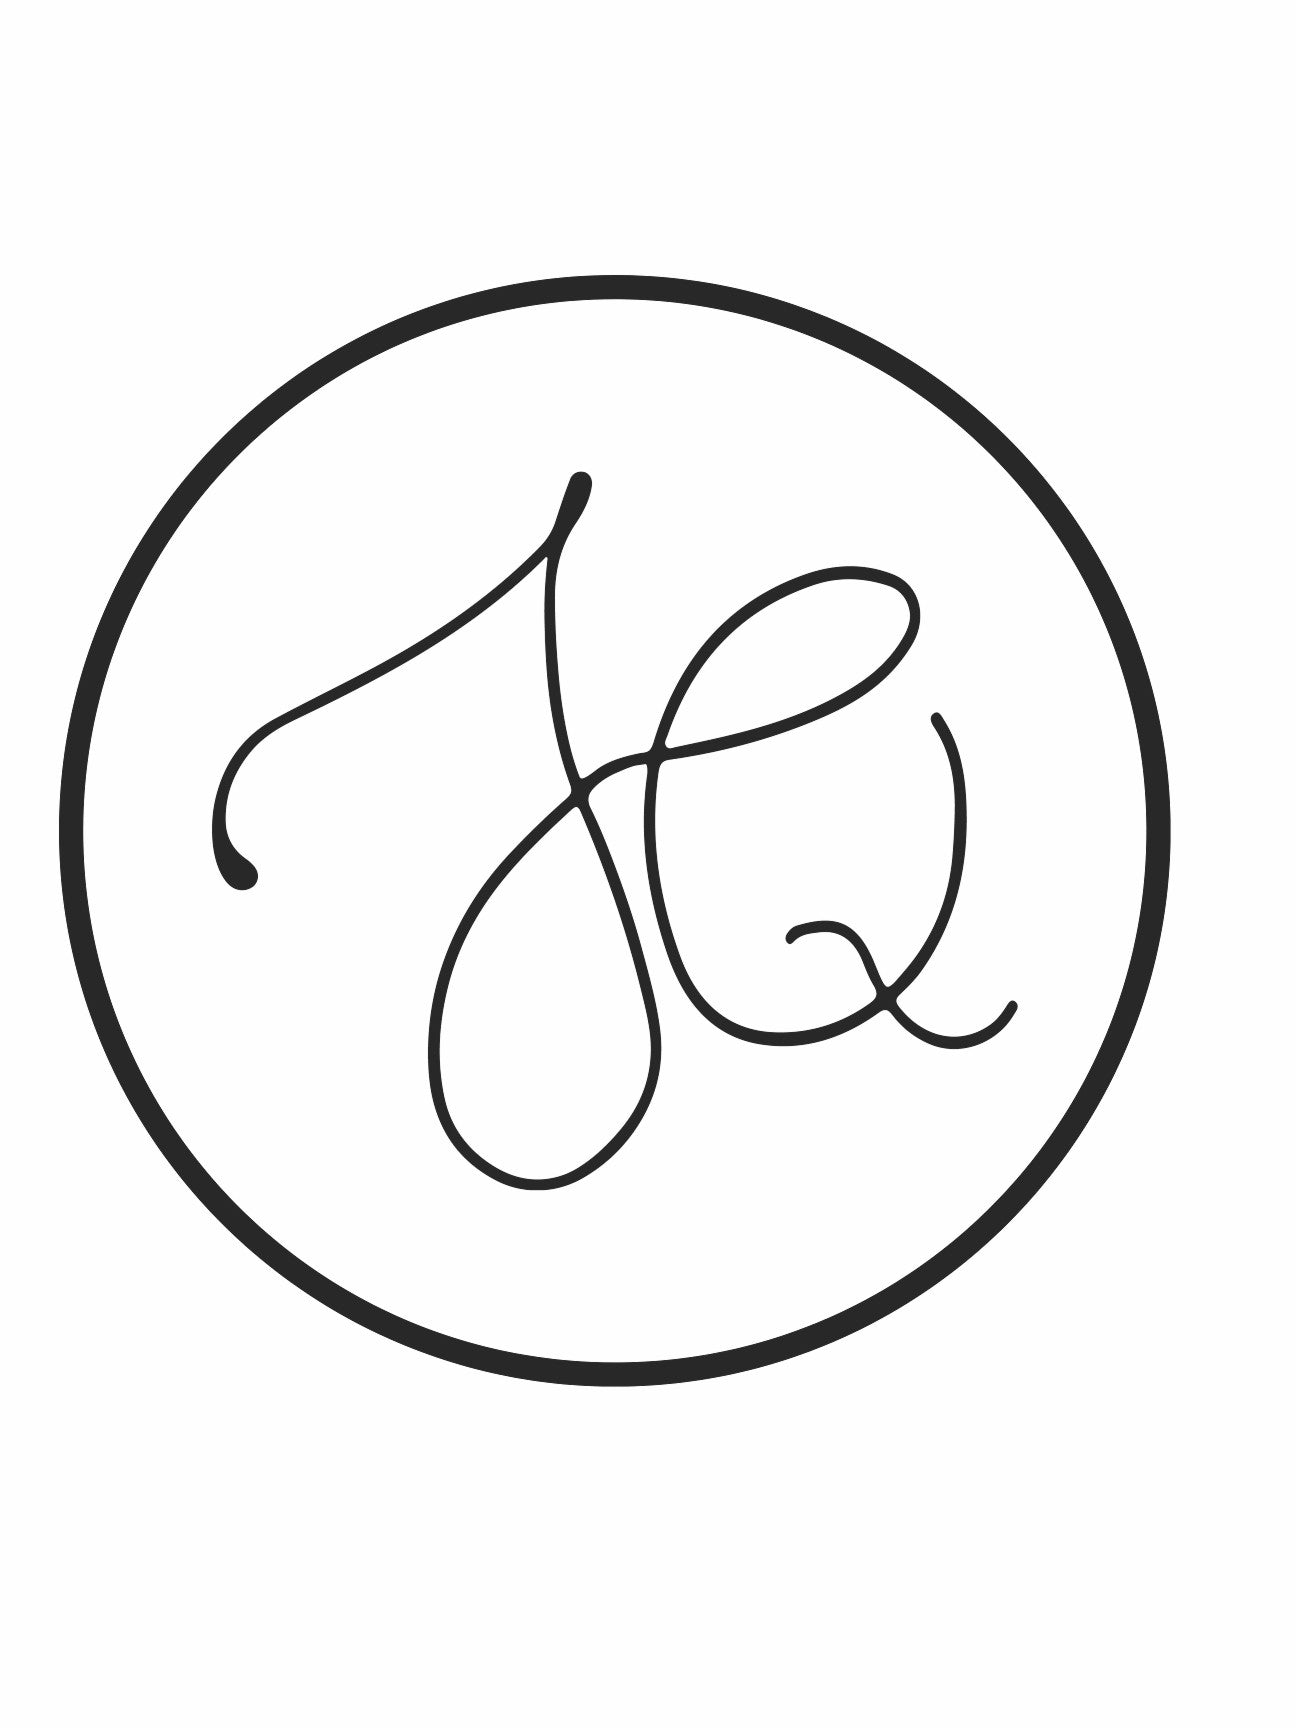 JQ Clothing Co. | Online Women's Clothing Boutique - JQ Clothing Co